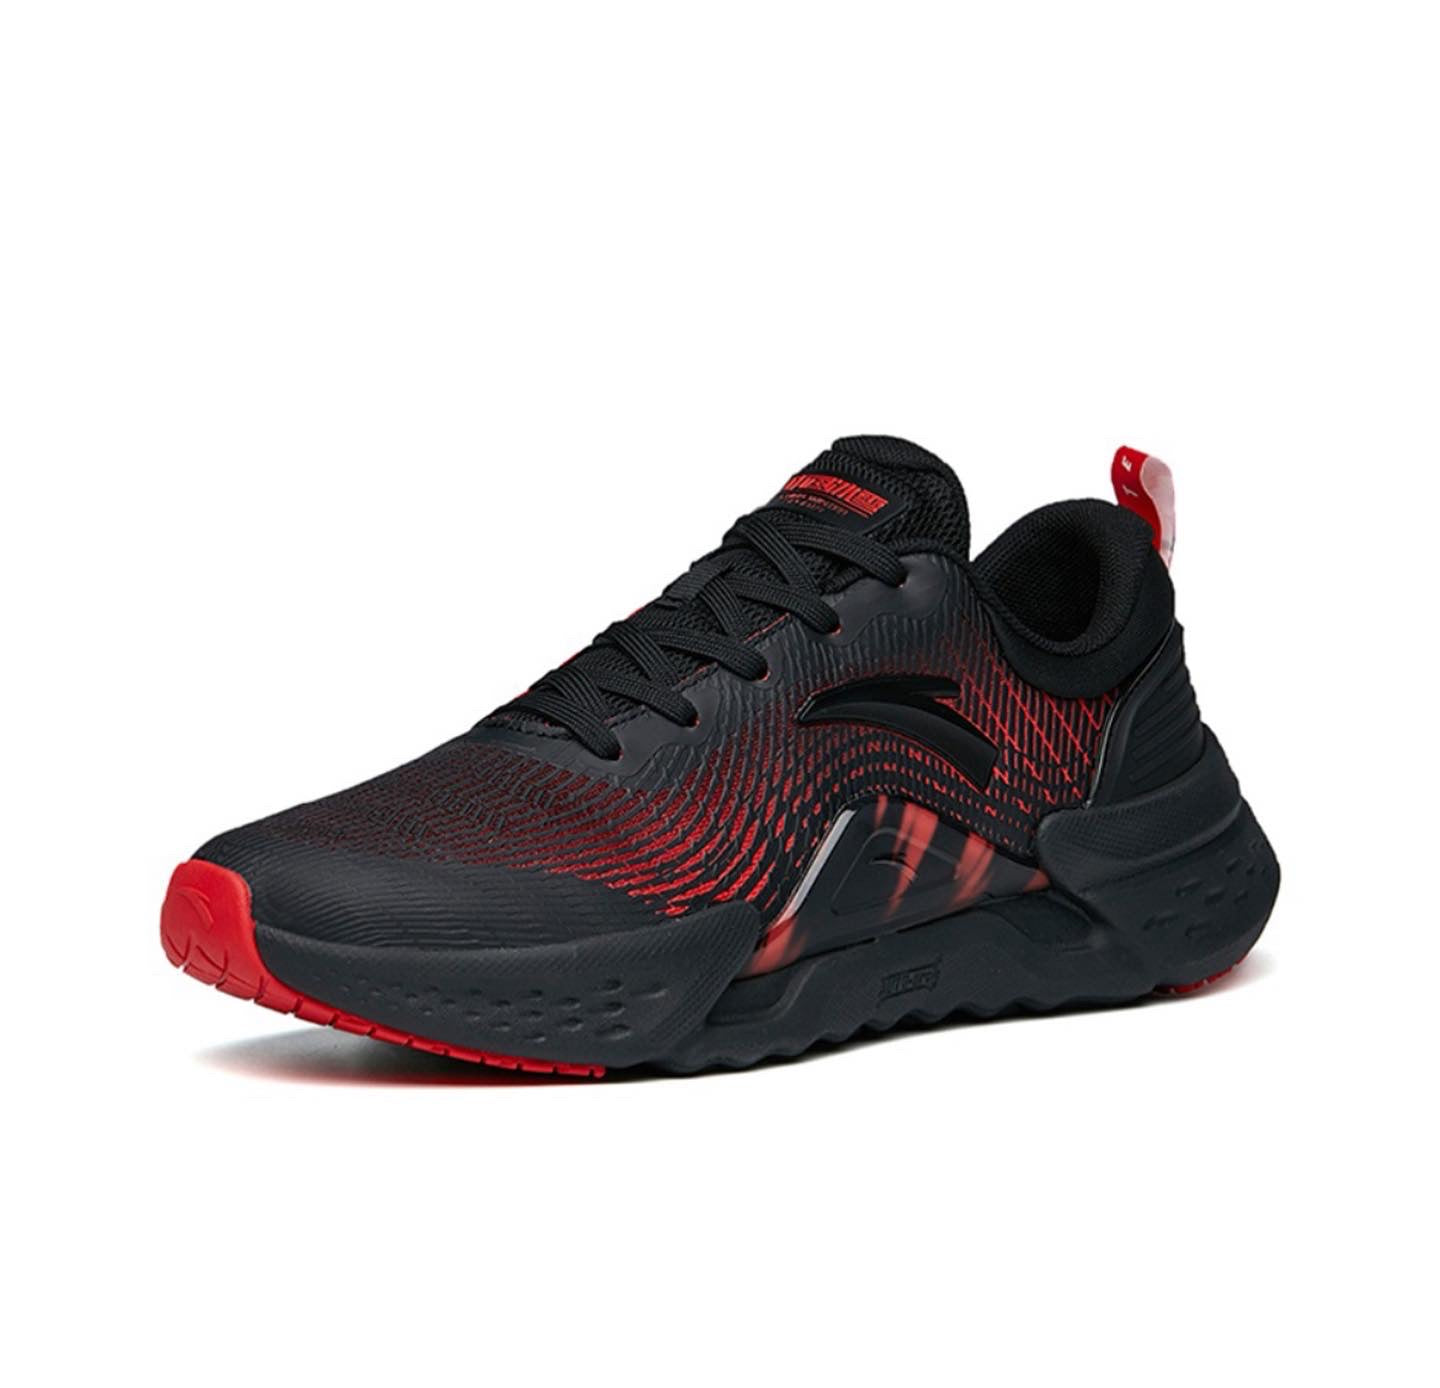 Anta National Team Training Weightlifting Shoes Black/Red